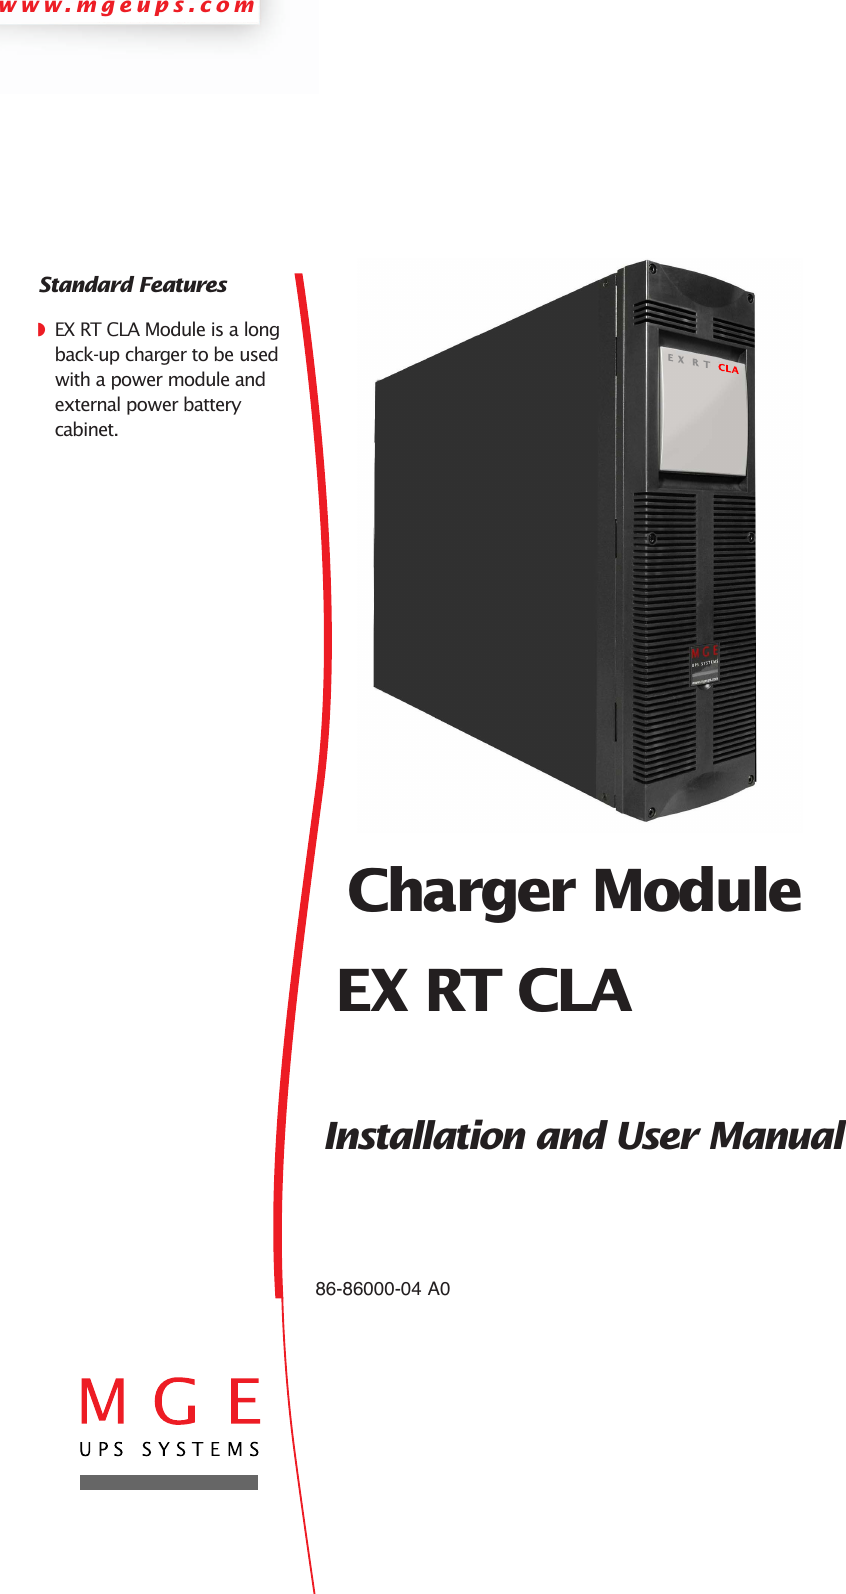 Page 1 of 6 - Mge-Ups-Systems Mge-Ups-Systems-Ex-Rt-Cla-Users-Manual- 86-86000-04 AO QS CLA  Mge-ups-systems-ex-rt-cla-users-manual